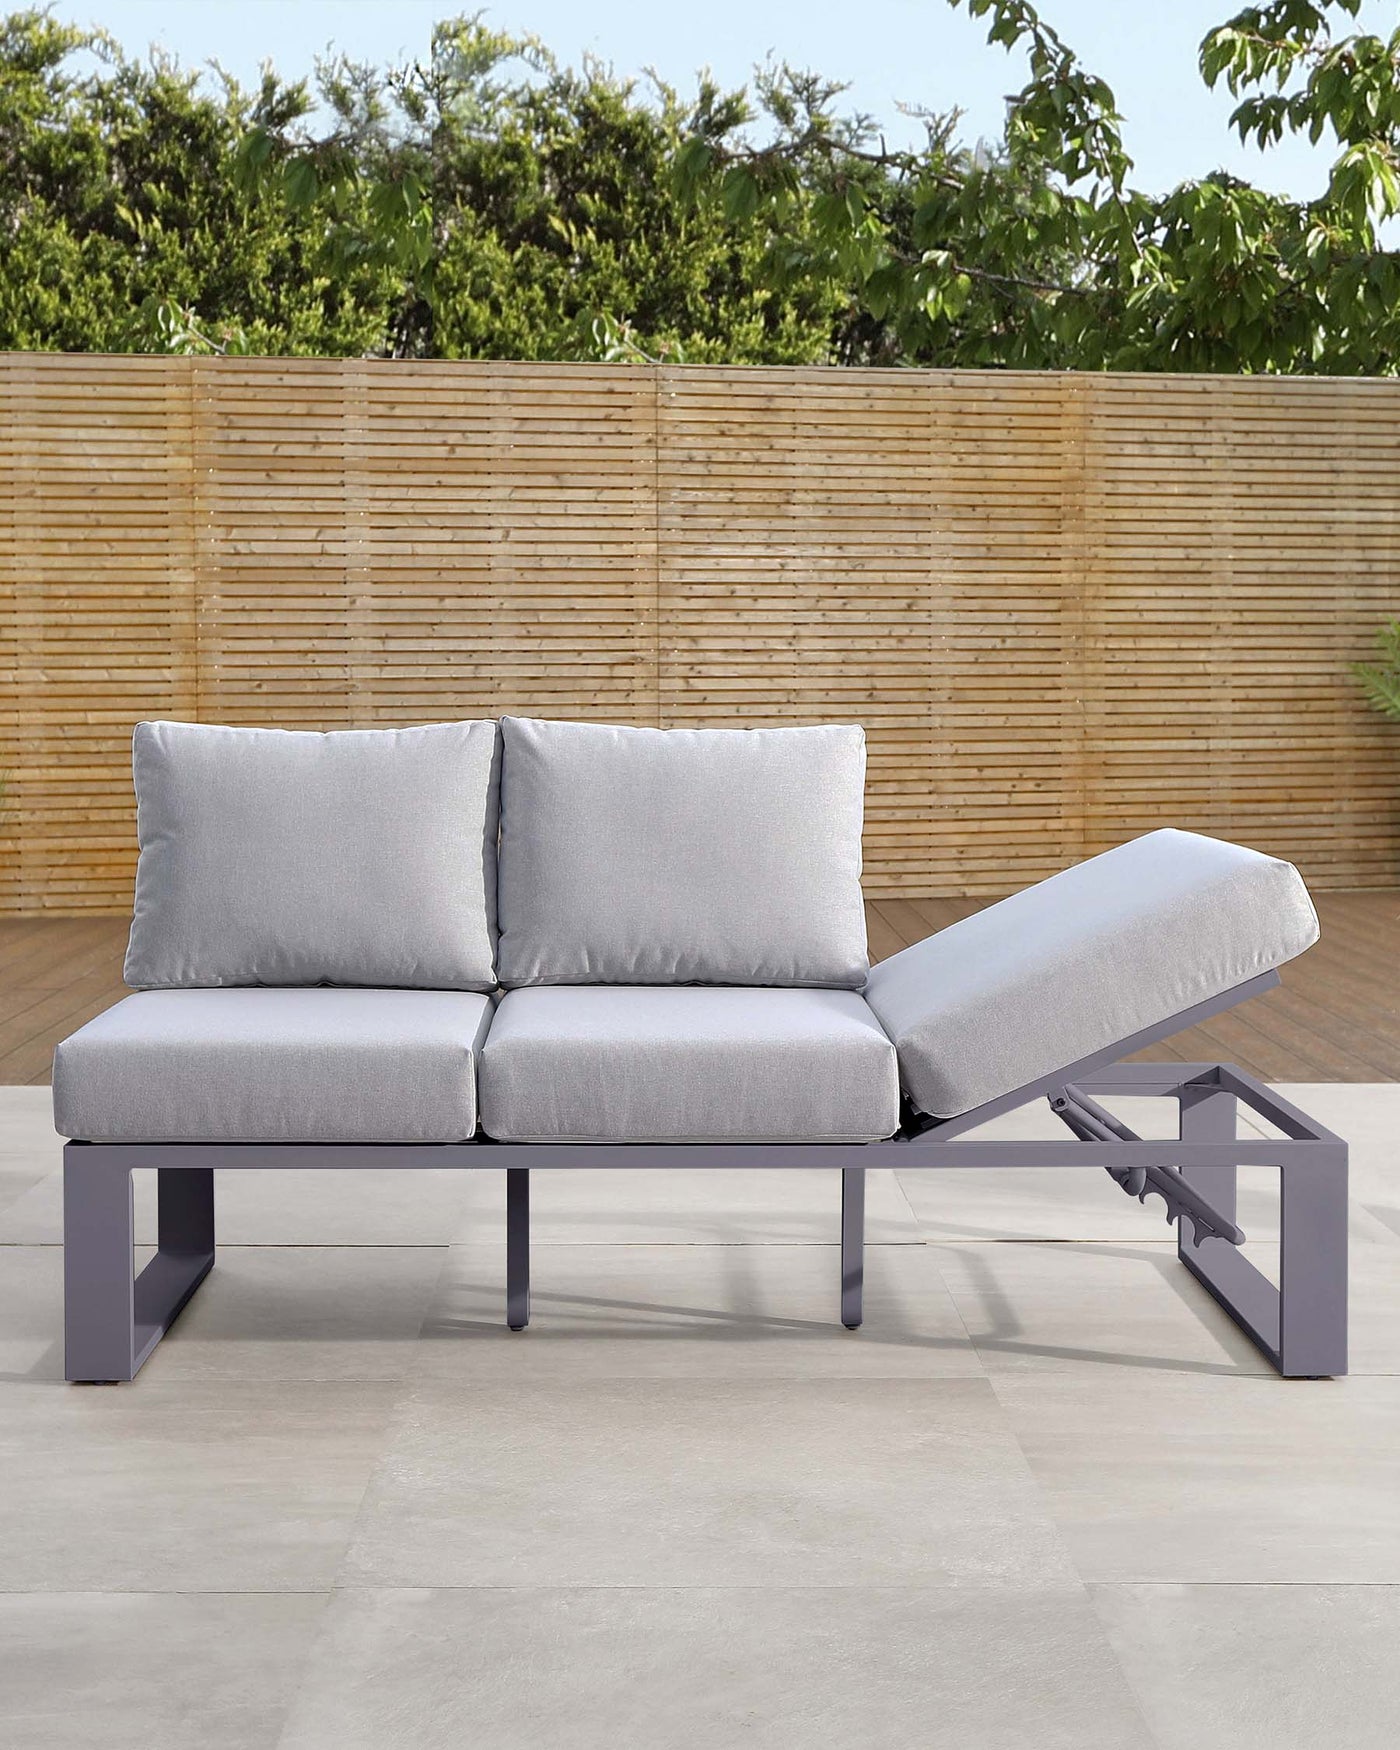 Contemporary outdoor sectional with a chaise lounge, featuring a sturdy grey aluminium frame with clean lines and grey cushions for a sleek and modern look.